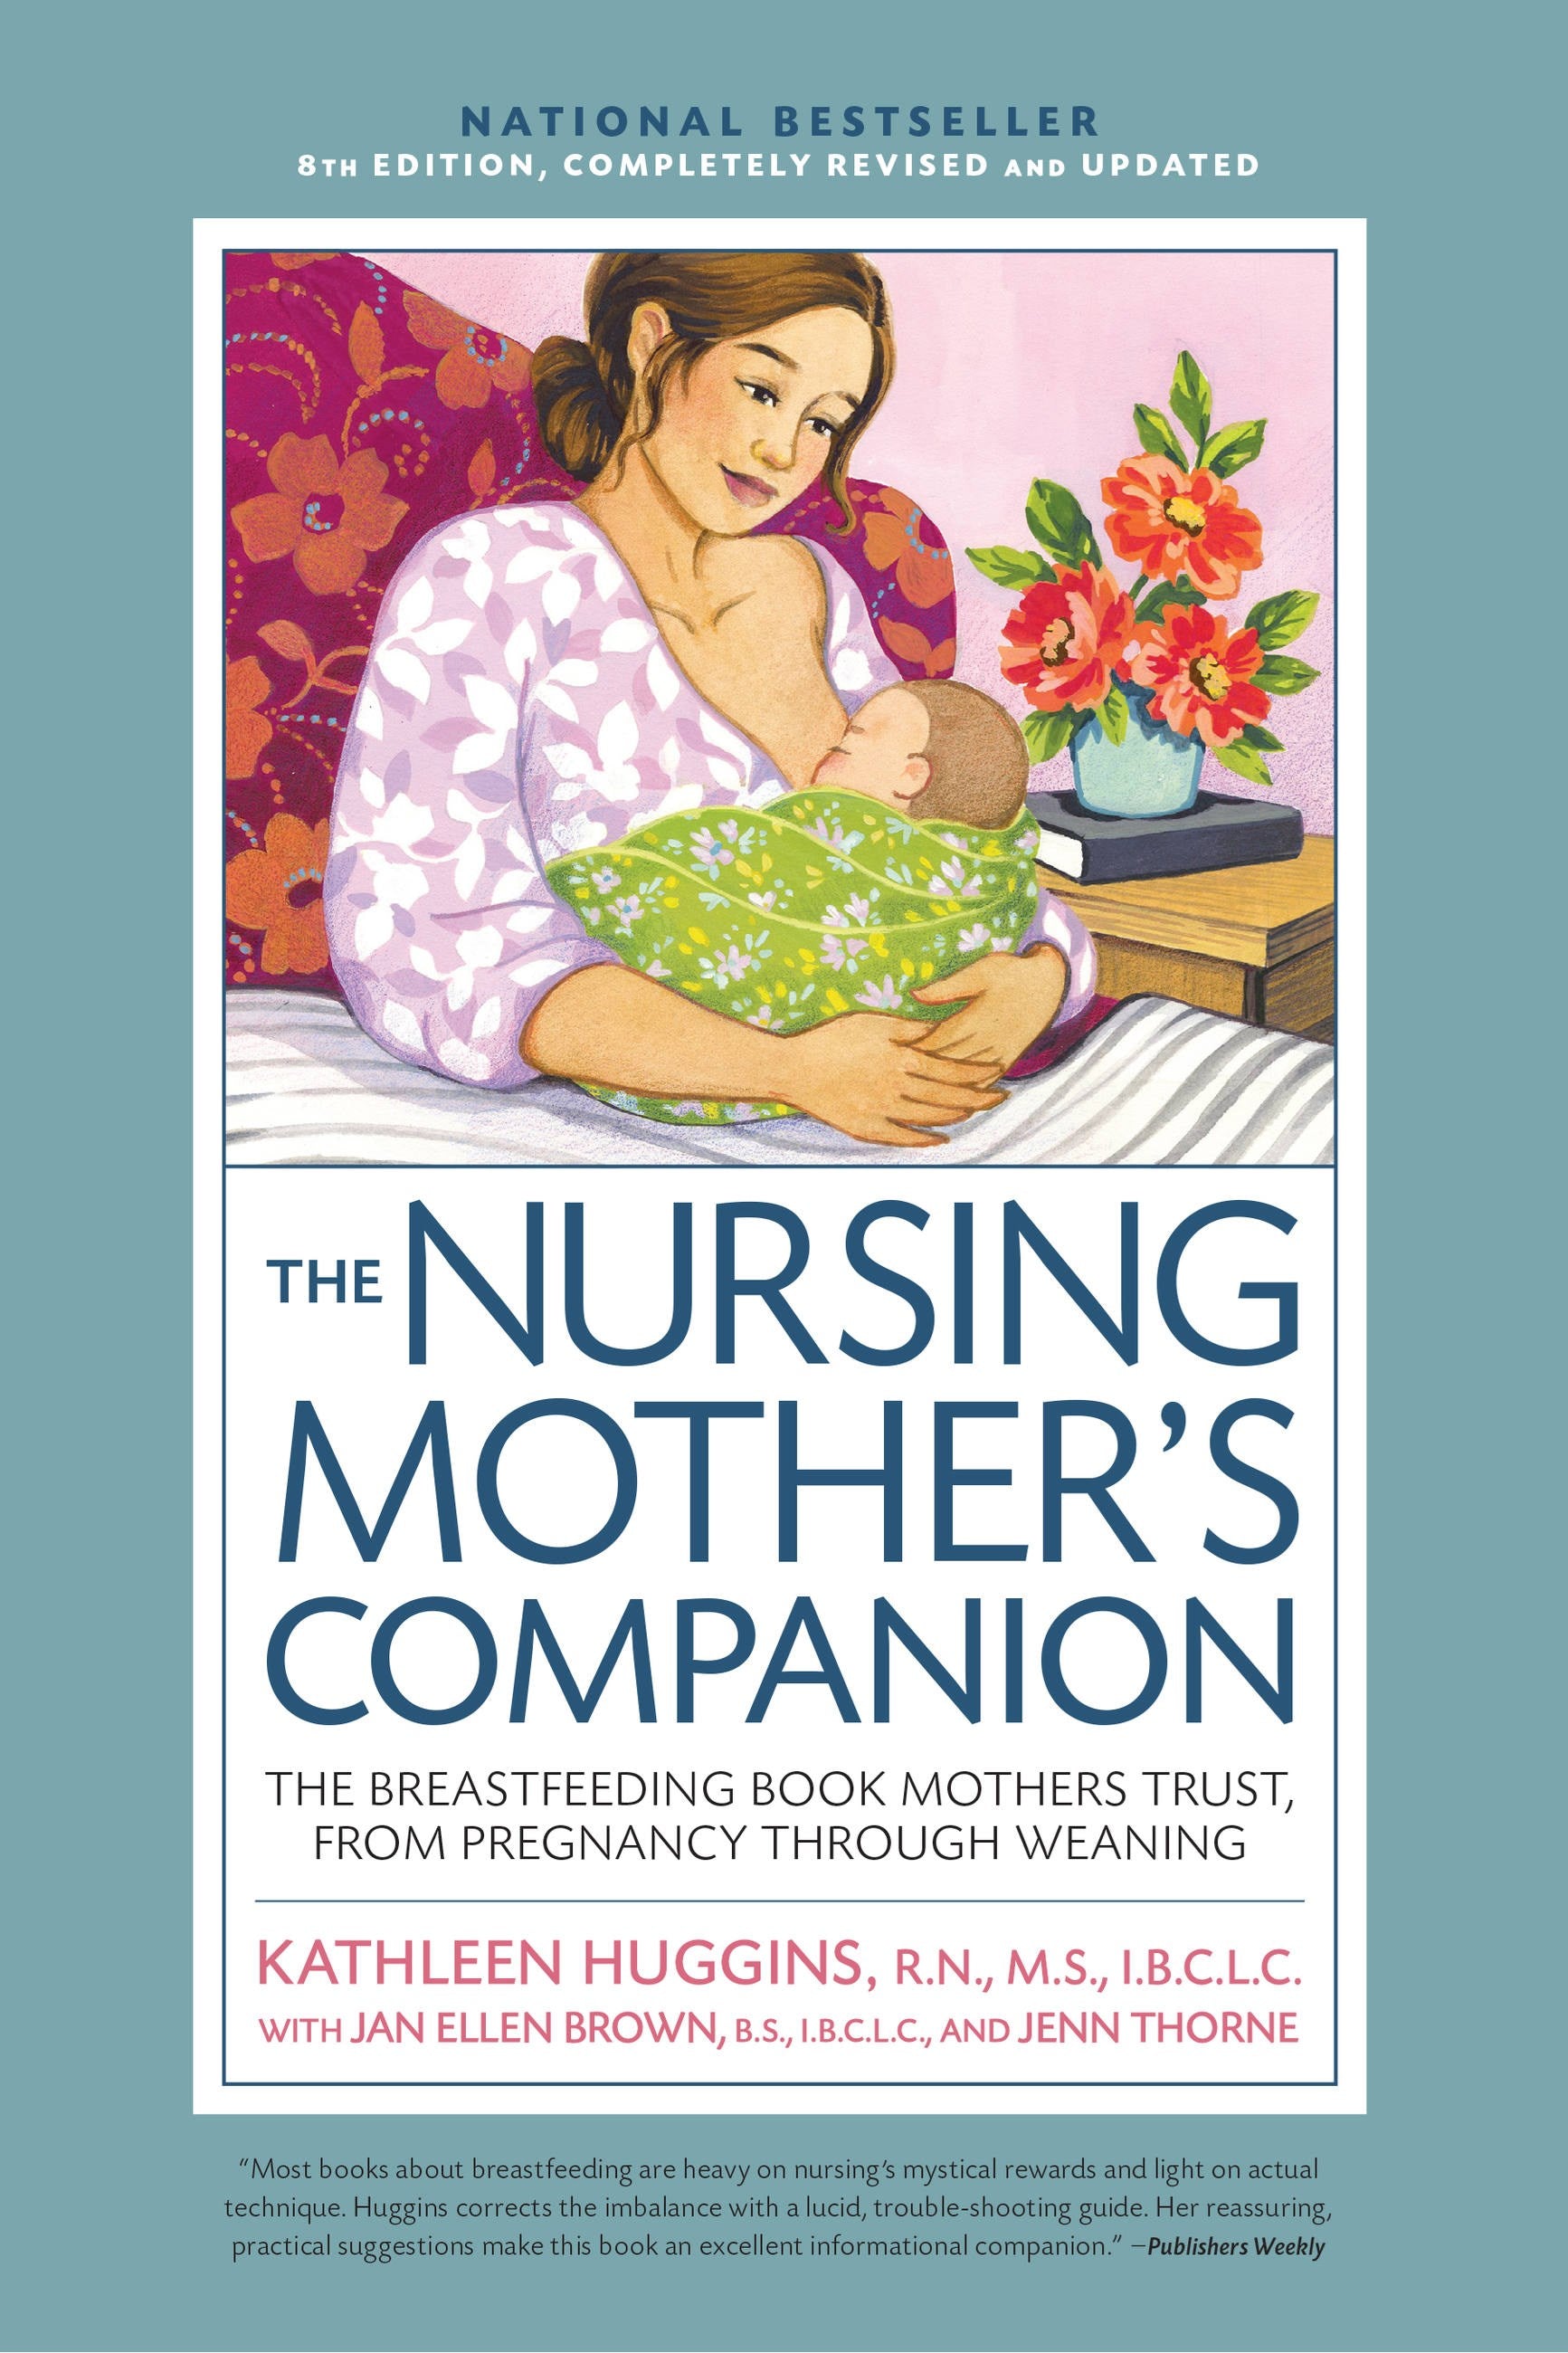 Nursing Mother's Companion 8th Edition: The Breastfeeding Book Mothers Trust, from Pregnancy Through Weaning (New edition)